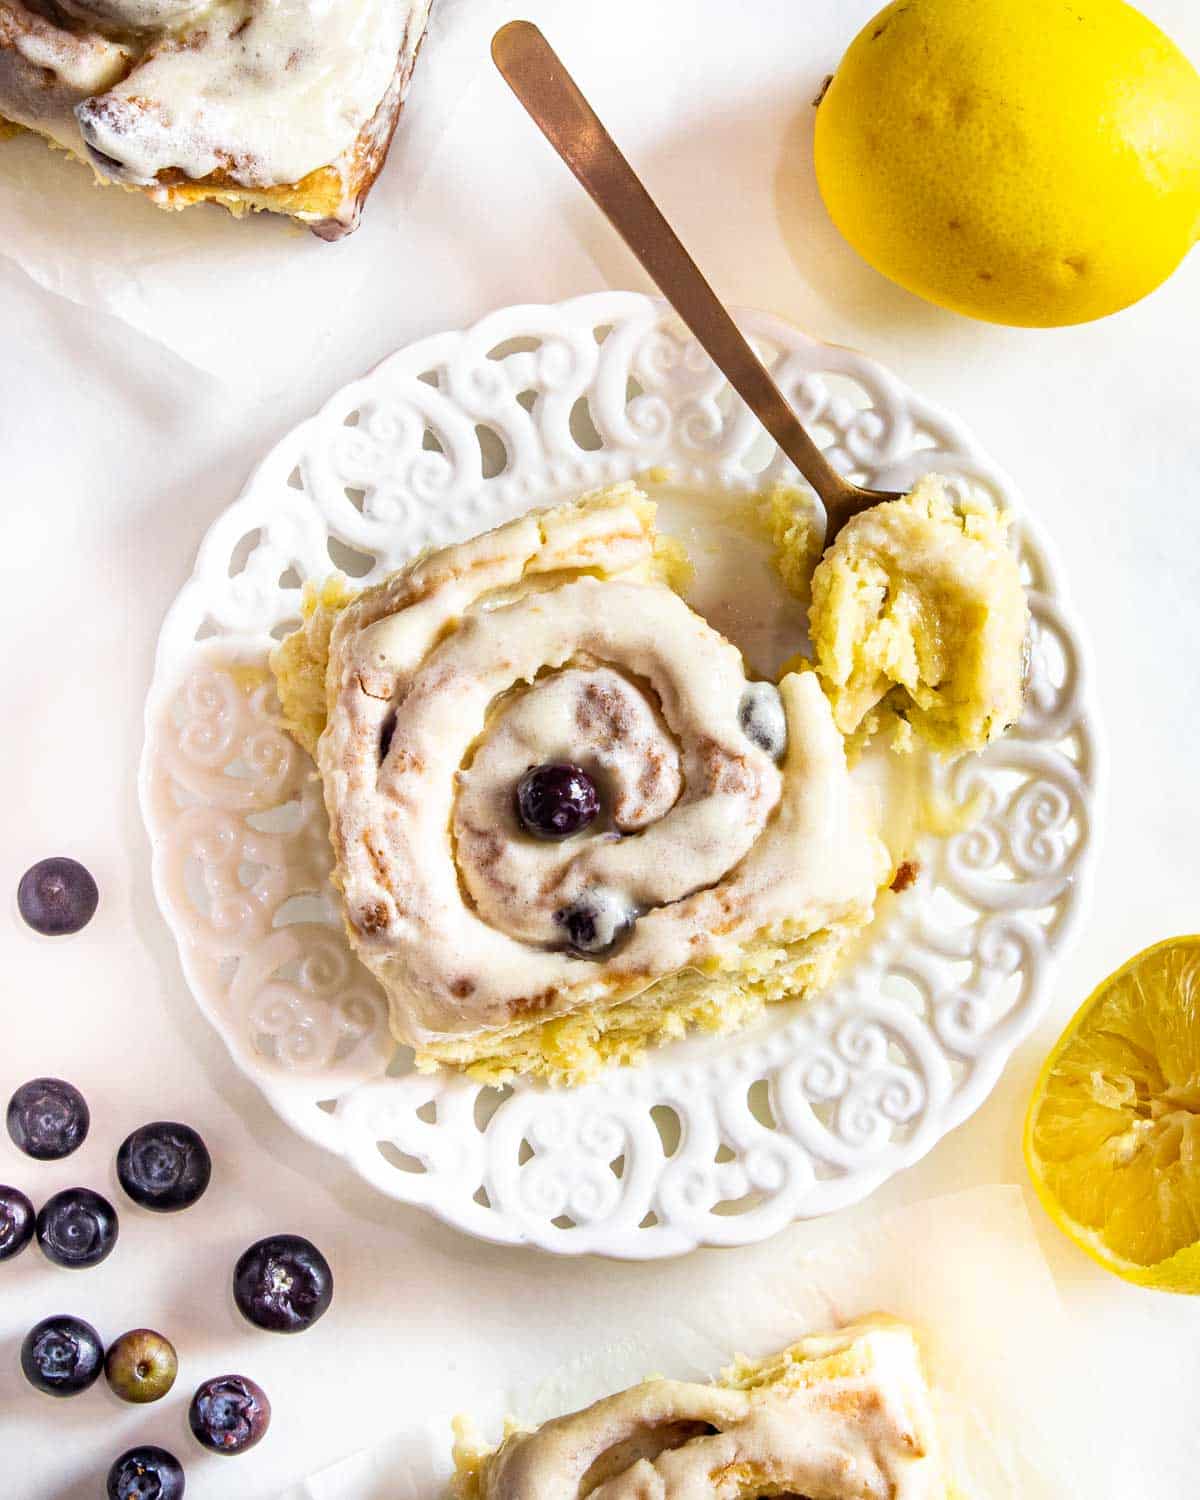 blueberry roll with cream cheese icing on a white plate with a spoon.